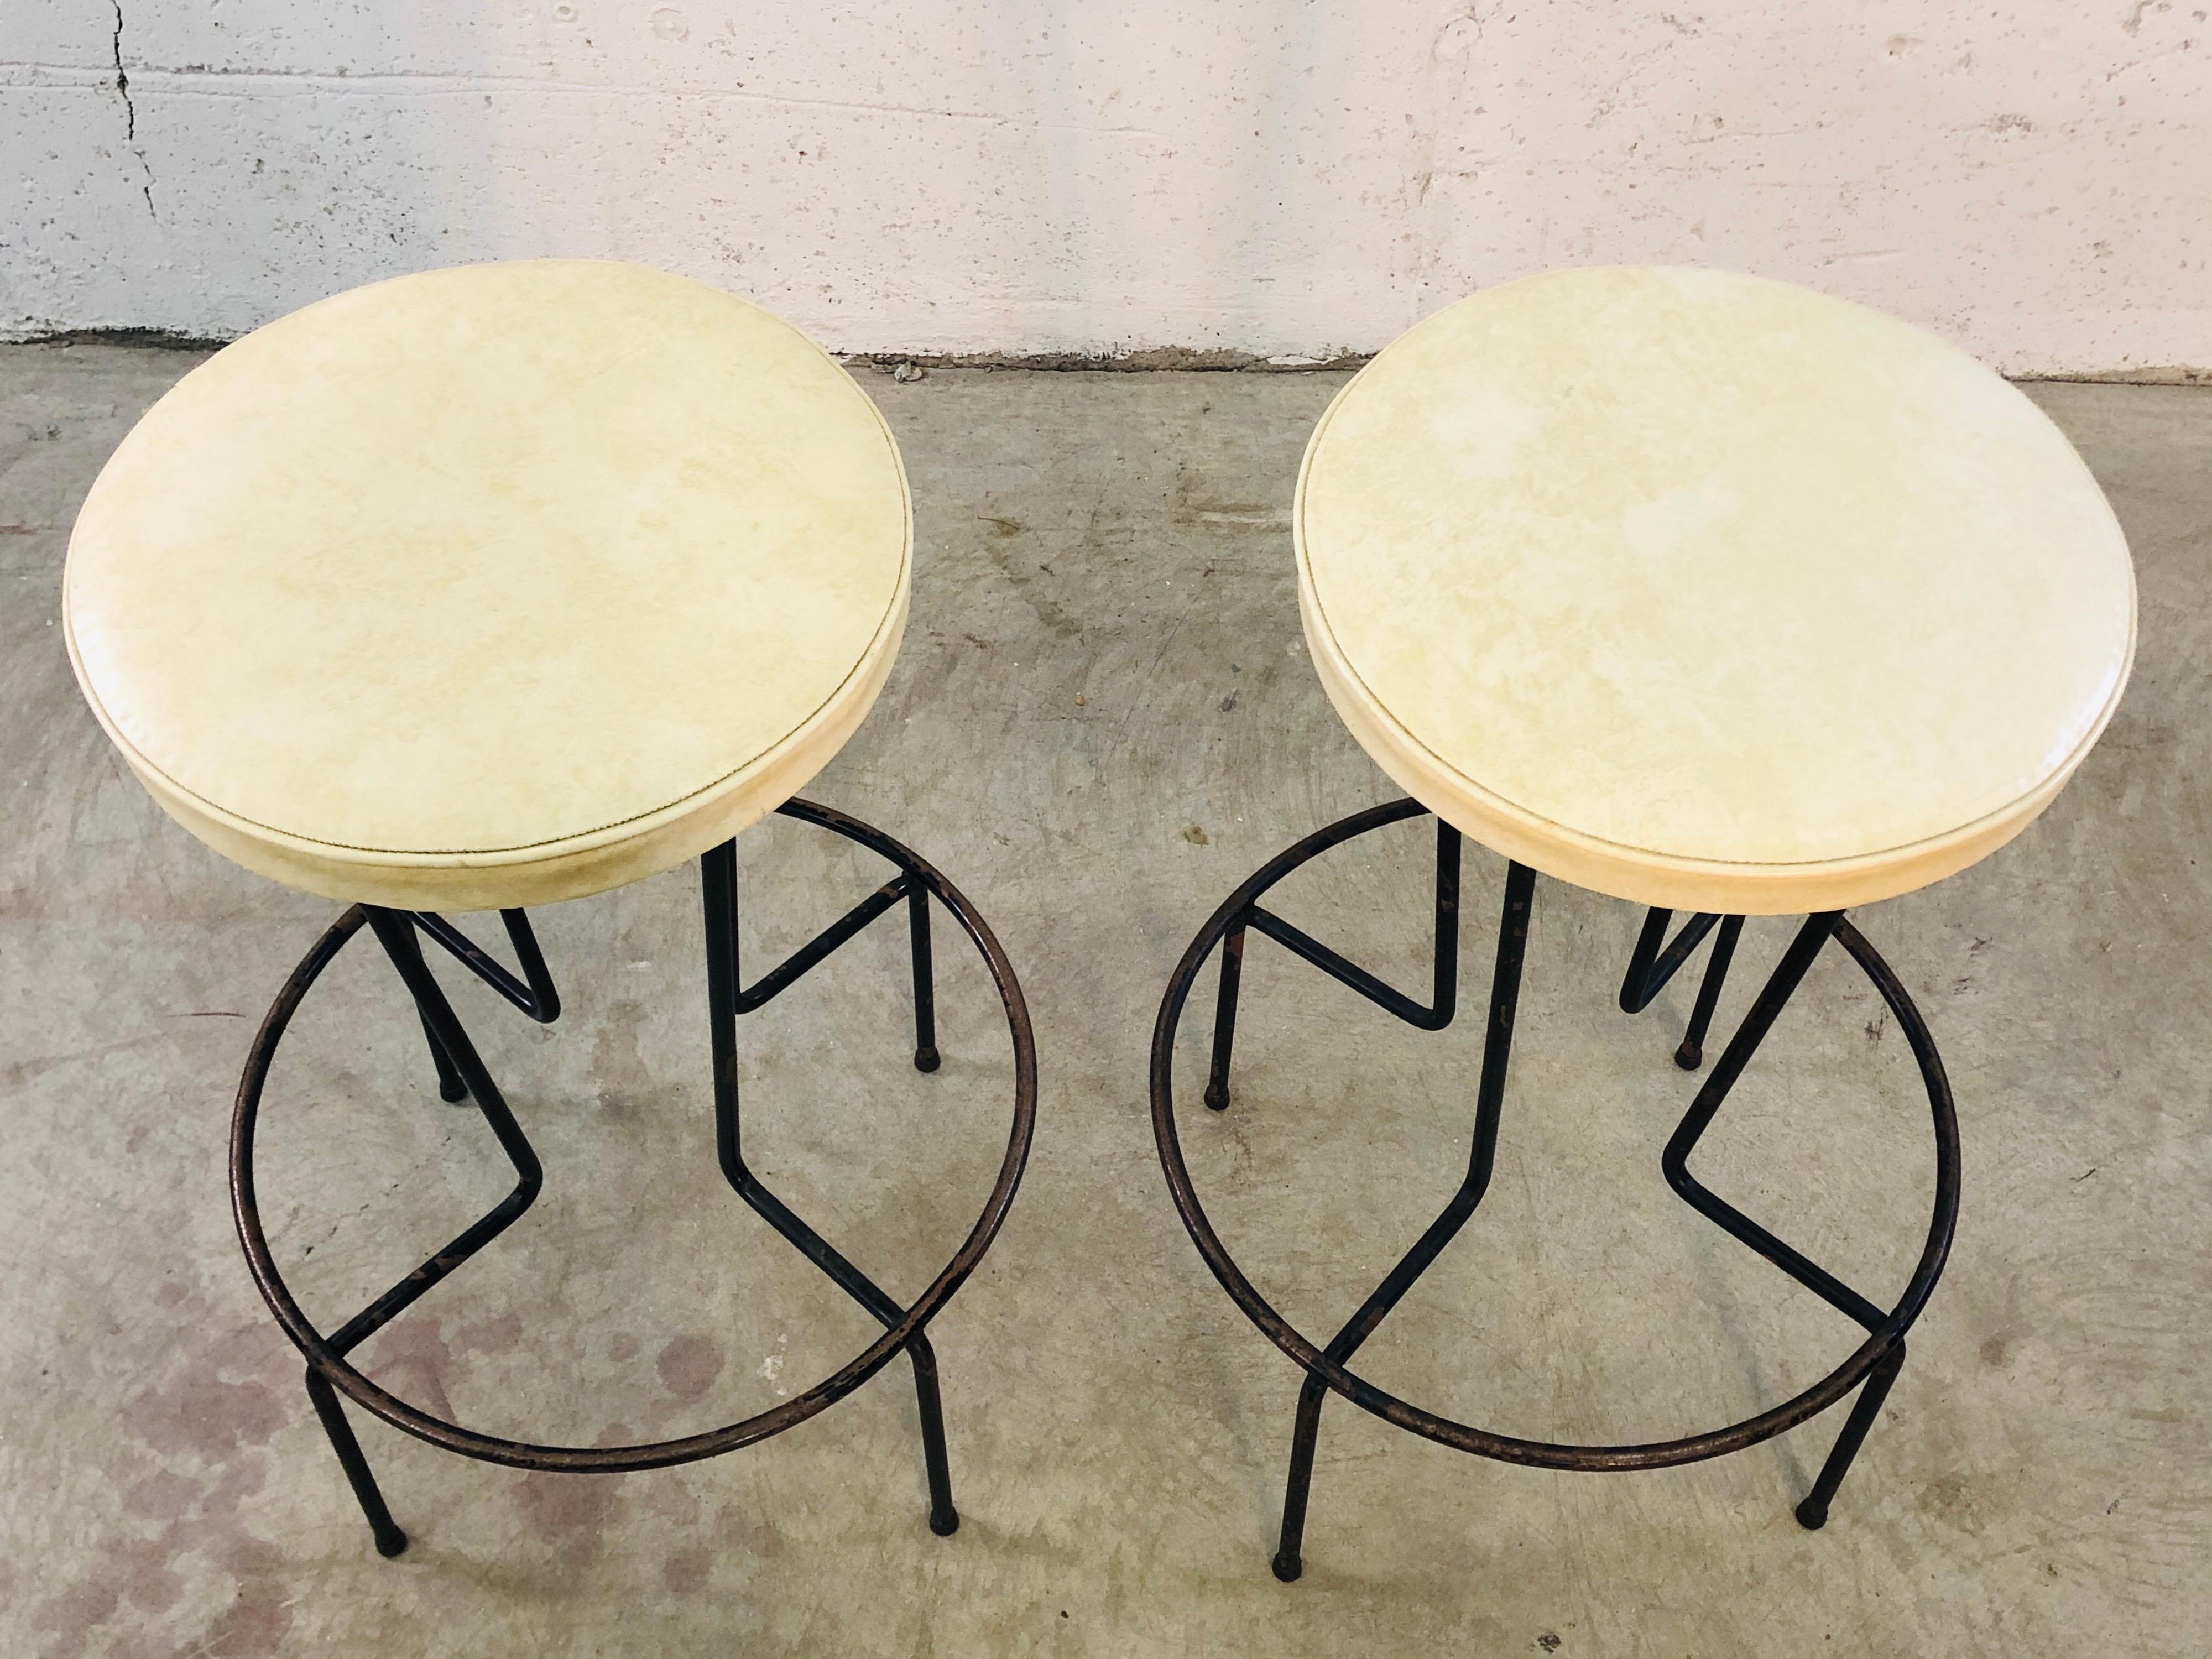 20th Century Vintage Frederick Weinberg Wrought Iron Bar Stools, Pair For Sale